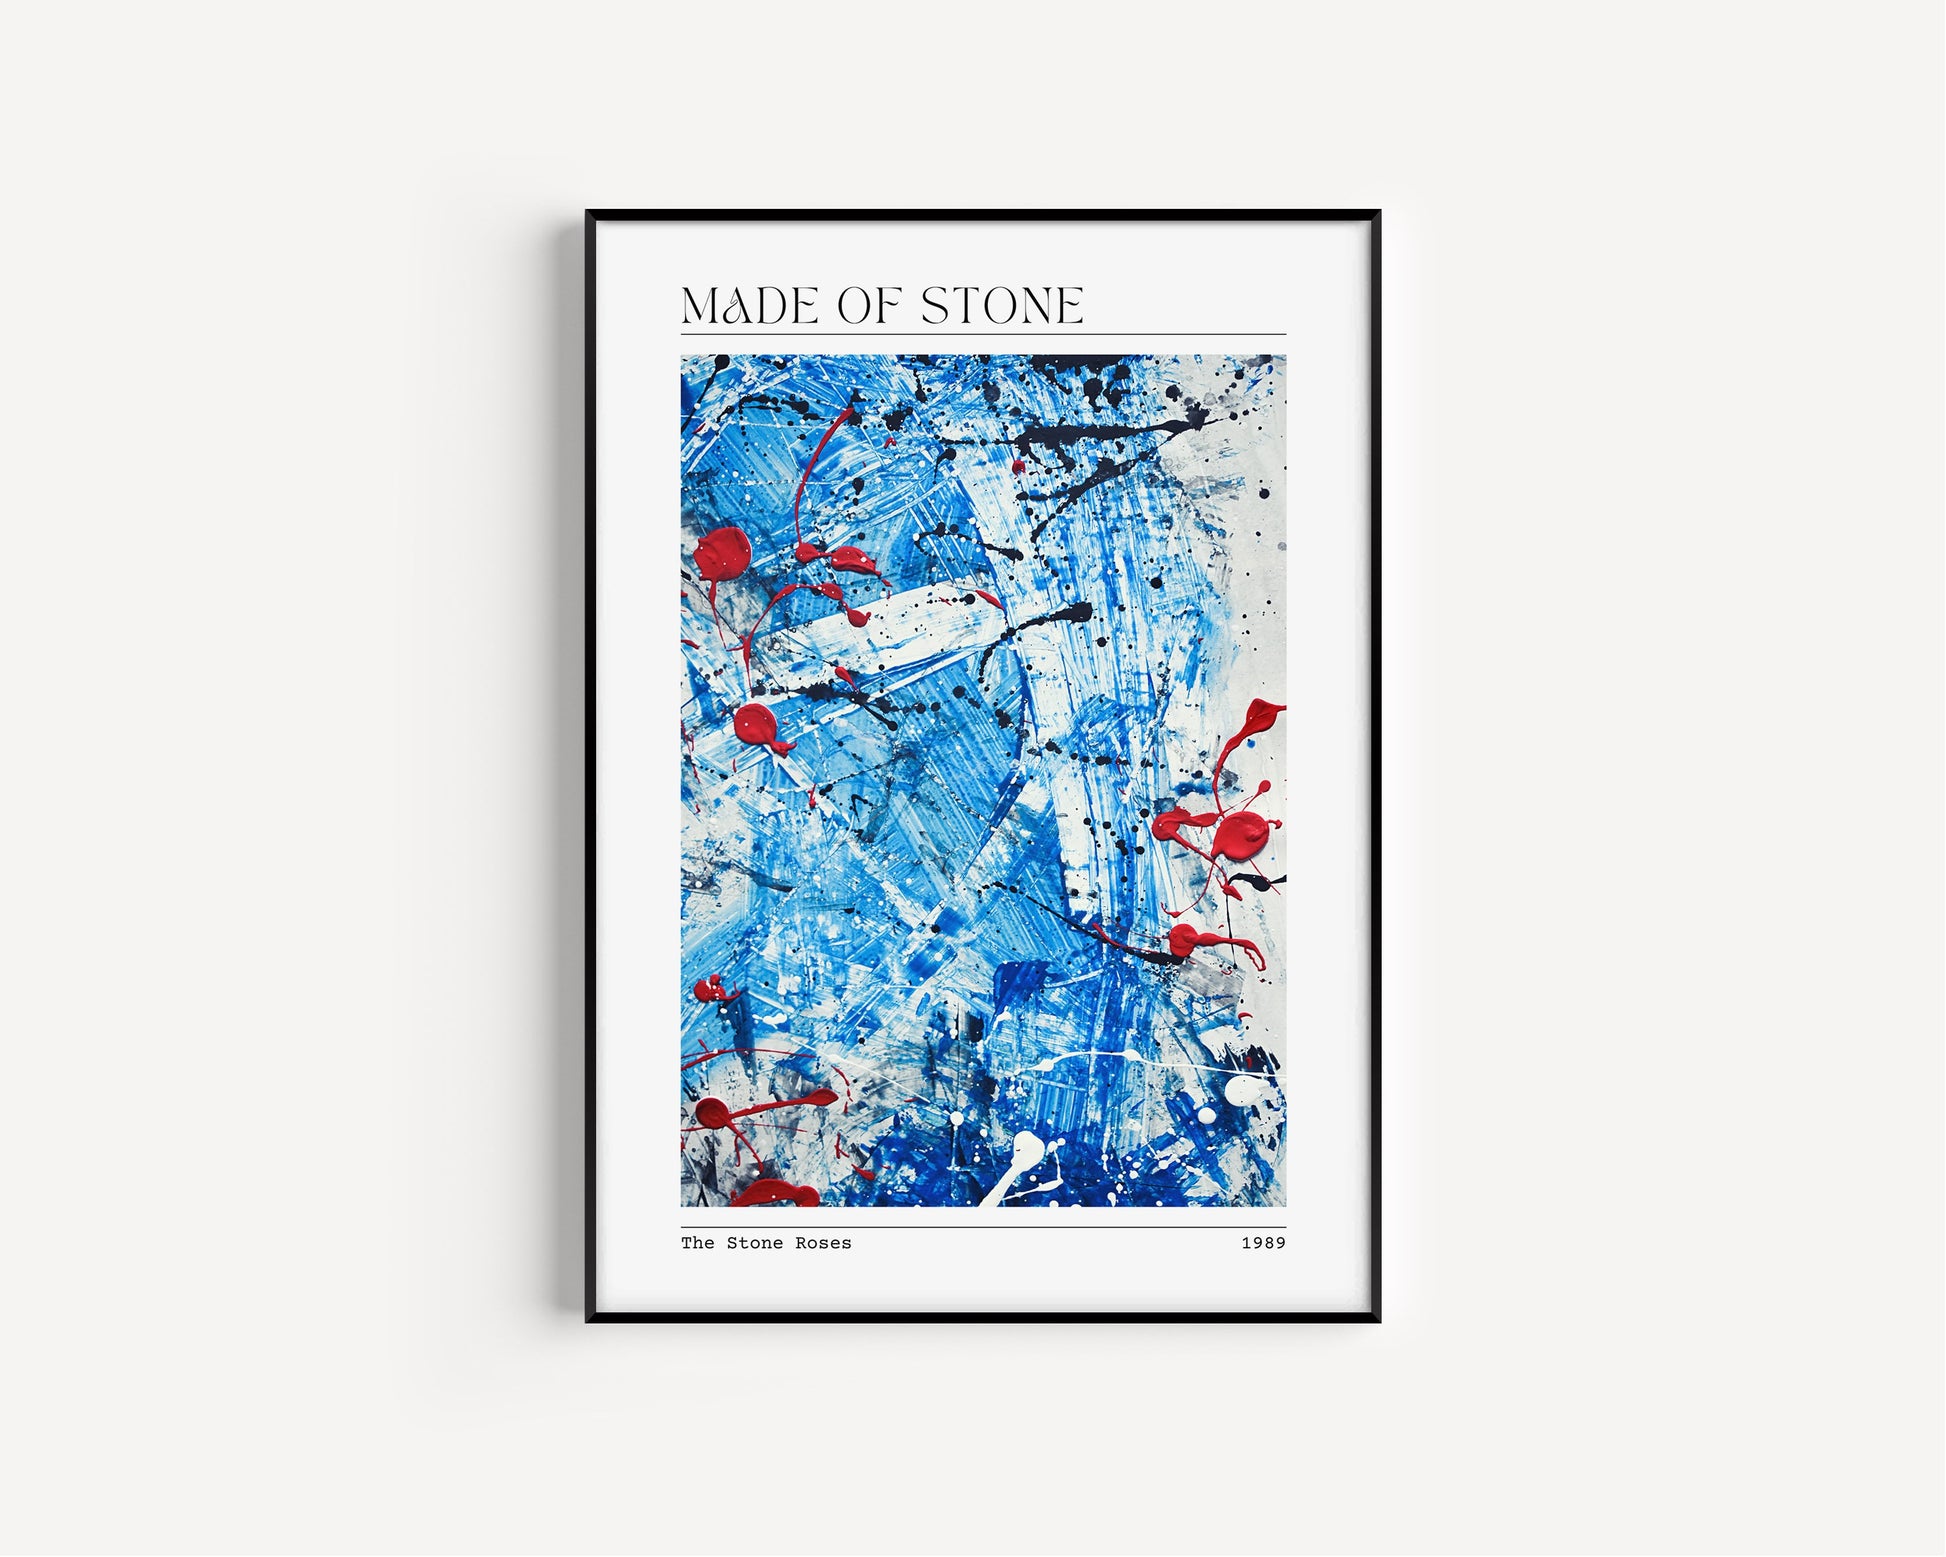 The Stone Roses Inspired Prints, Fools Gold, Sally Cinnamon, Stone Roses Songs, Stone Roses Poster, Indie Music Art Prints, Rock Prints